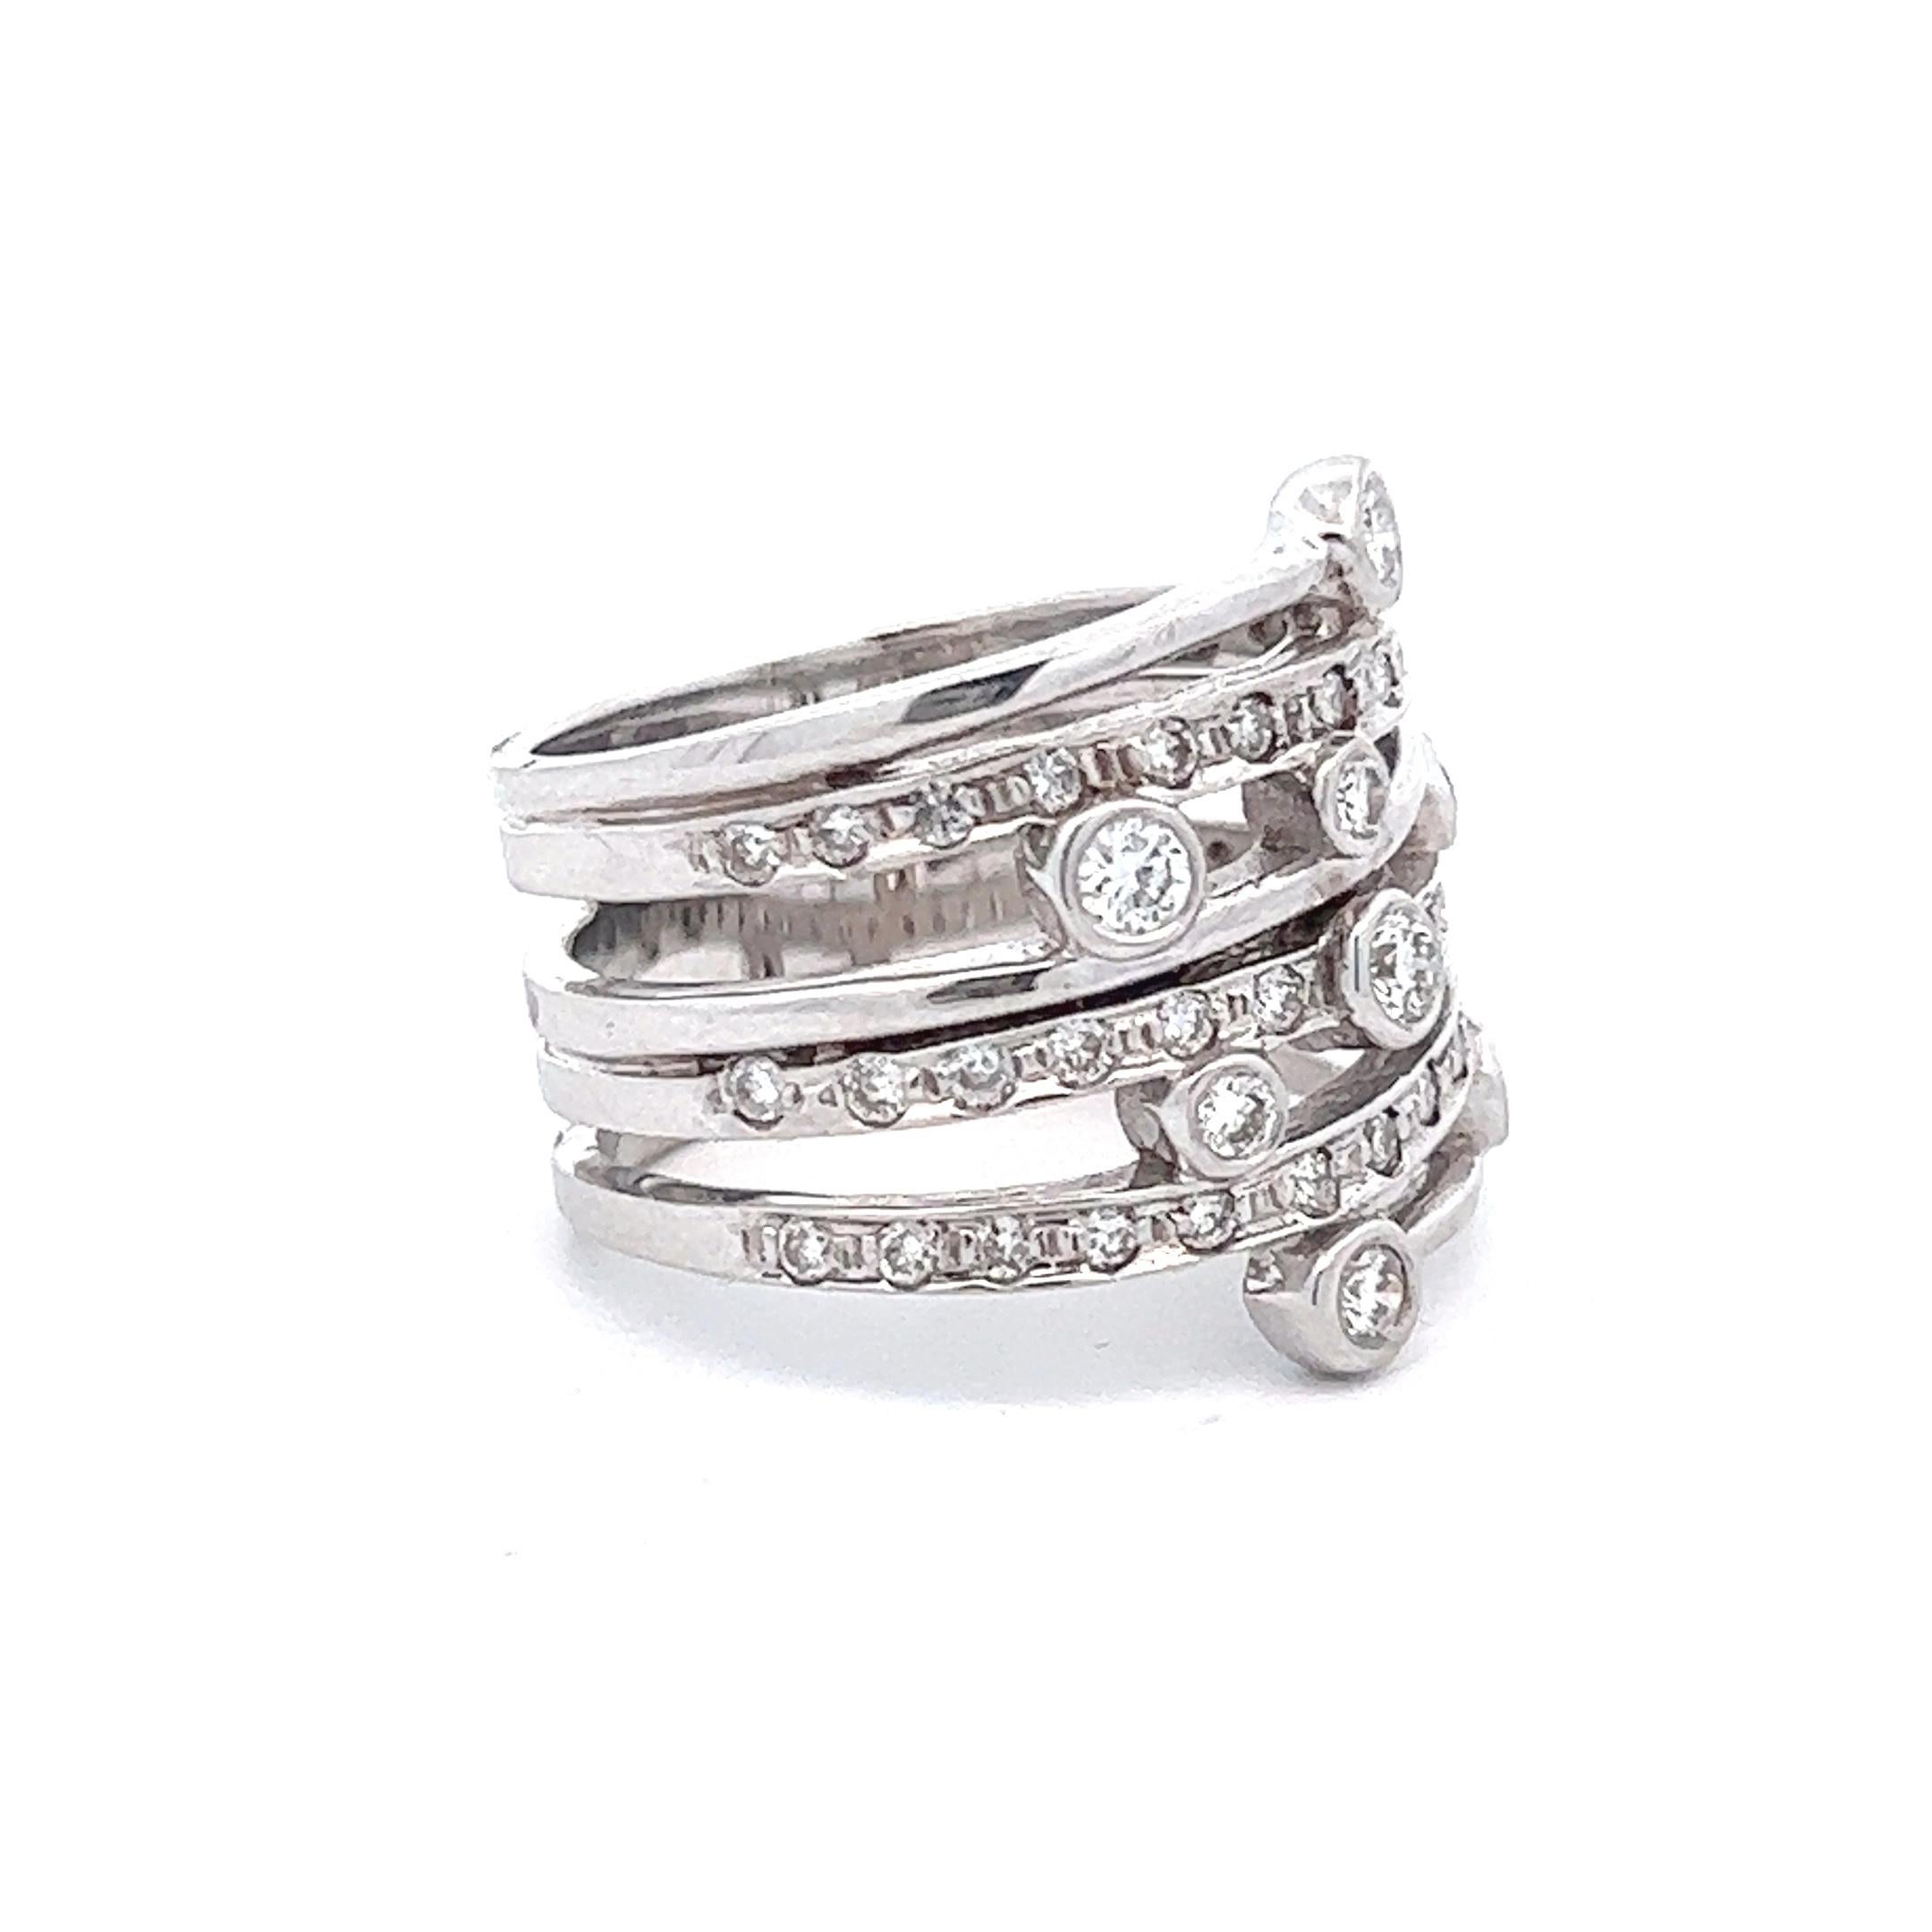 A lovely 18k white gold diamond ring stamped Andy G. The ring features approximately 0.6 ctw round brilliant diamonds asymmetrically channel set along it's bands. The ring is currently a size 7 but can be resized. 